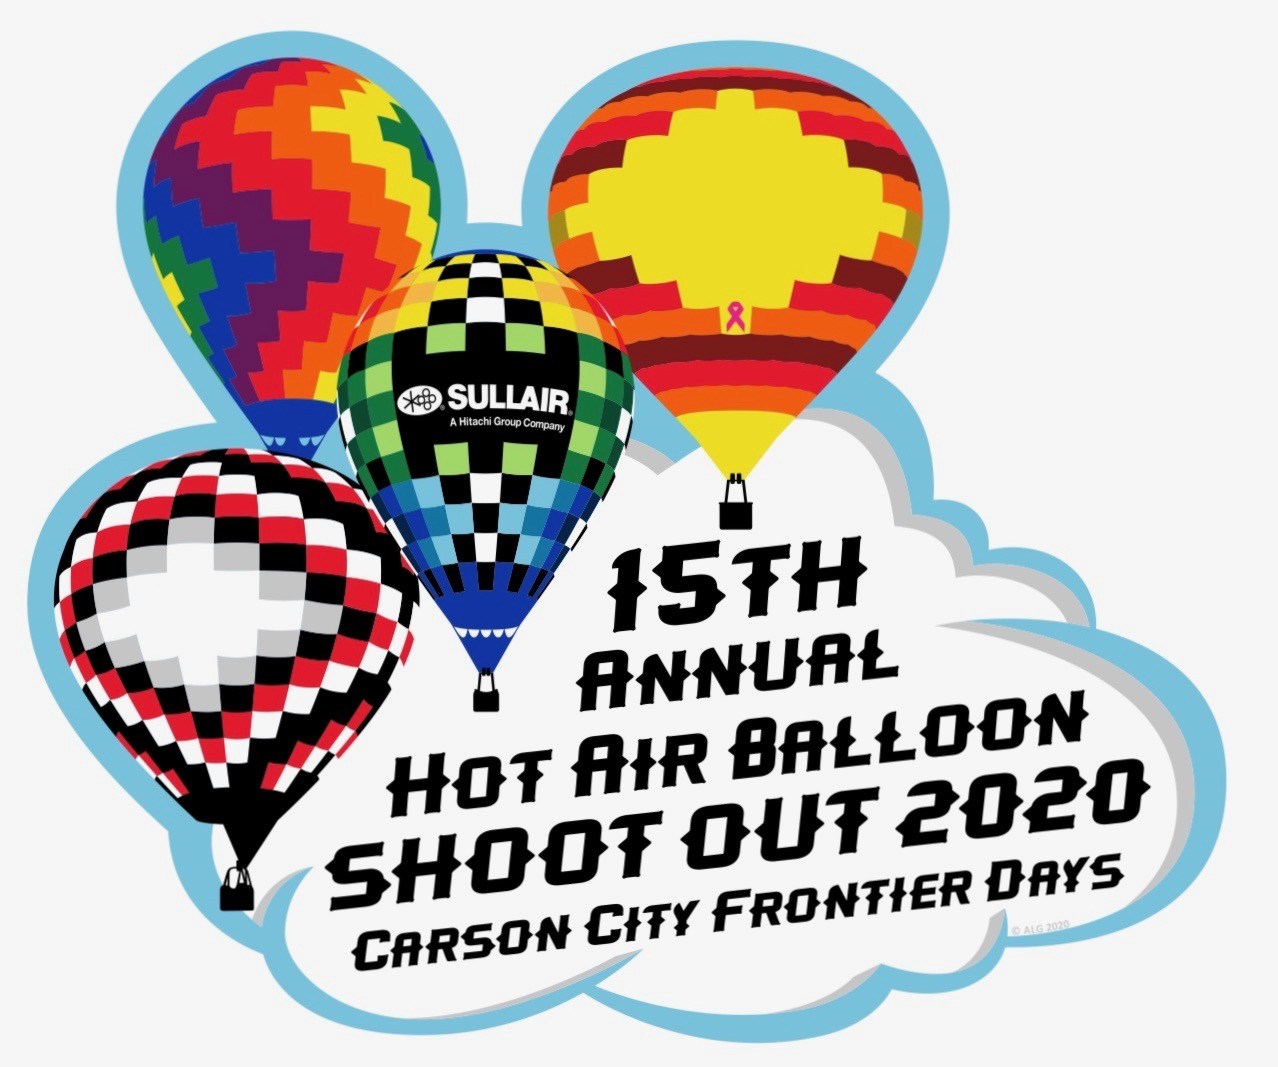 2021 Carson City Frontier Days